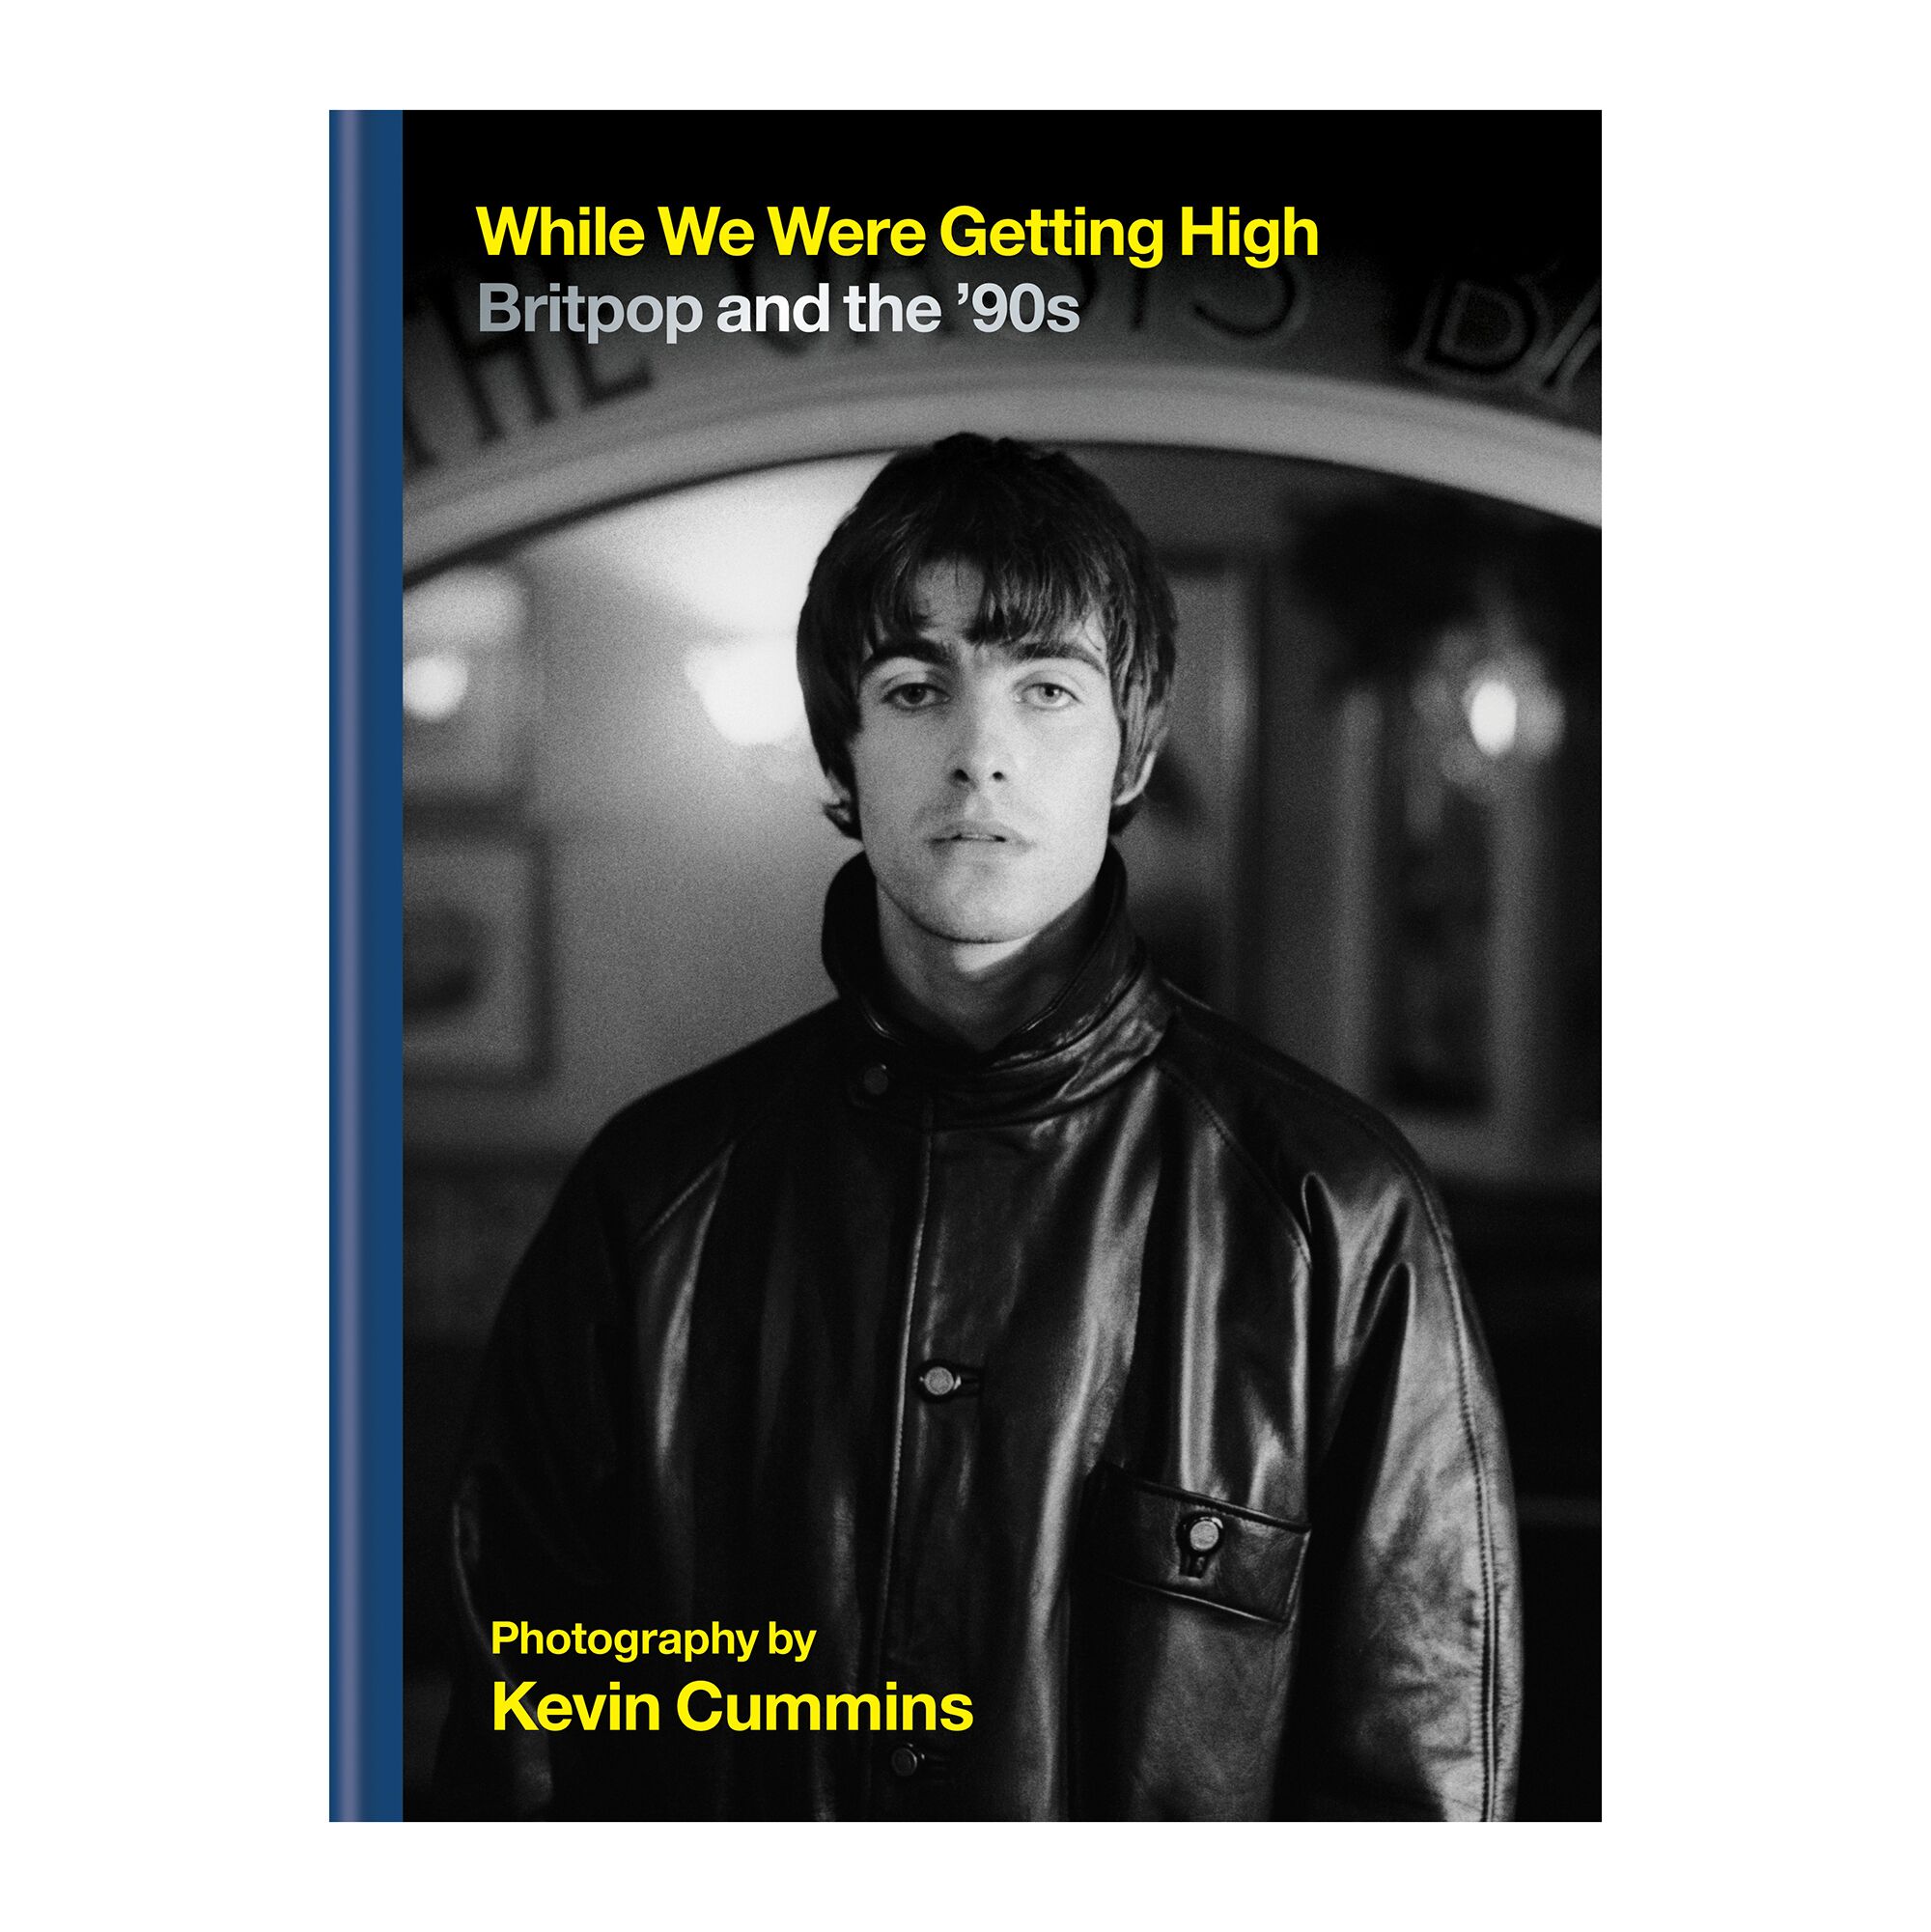 Kevin Cummins, "While We Were Getting High: Britpop and the 90s"